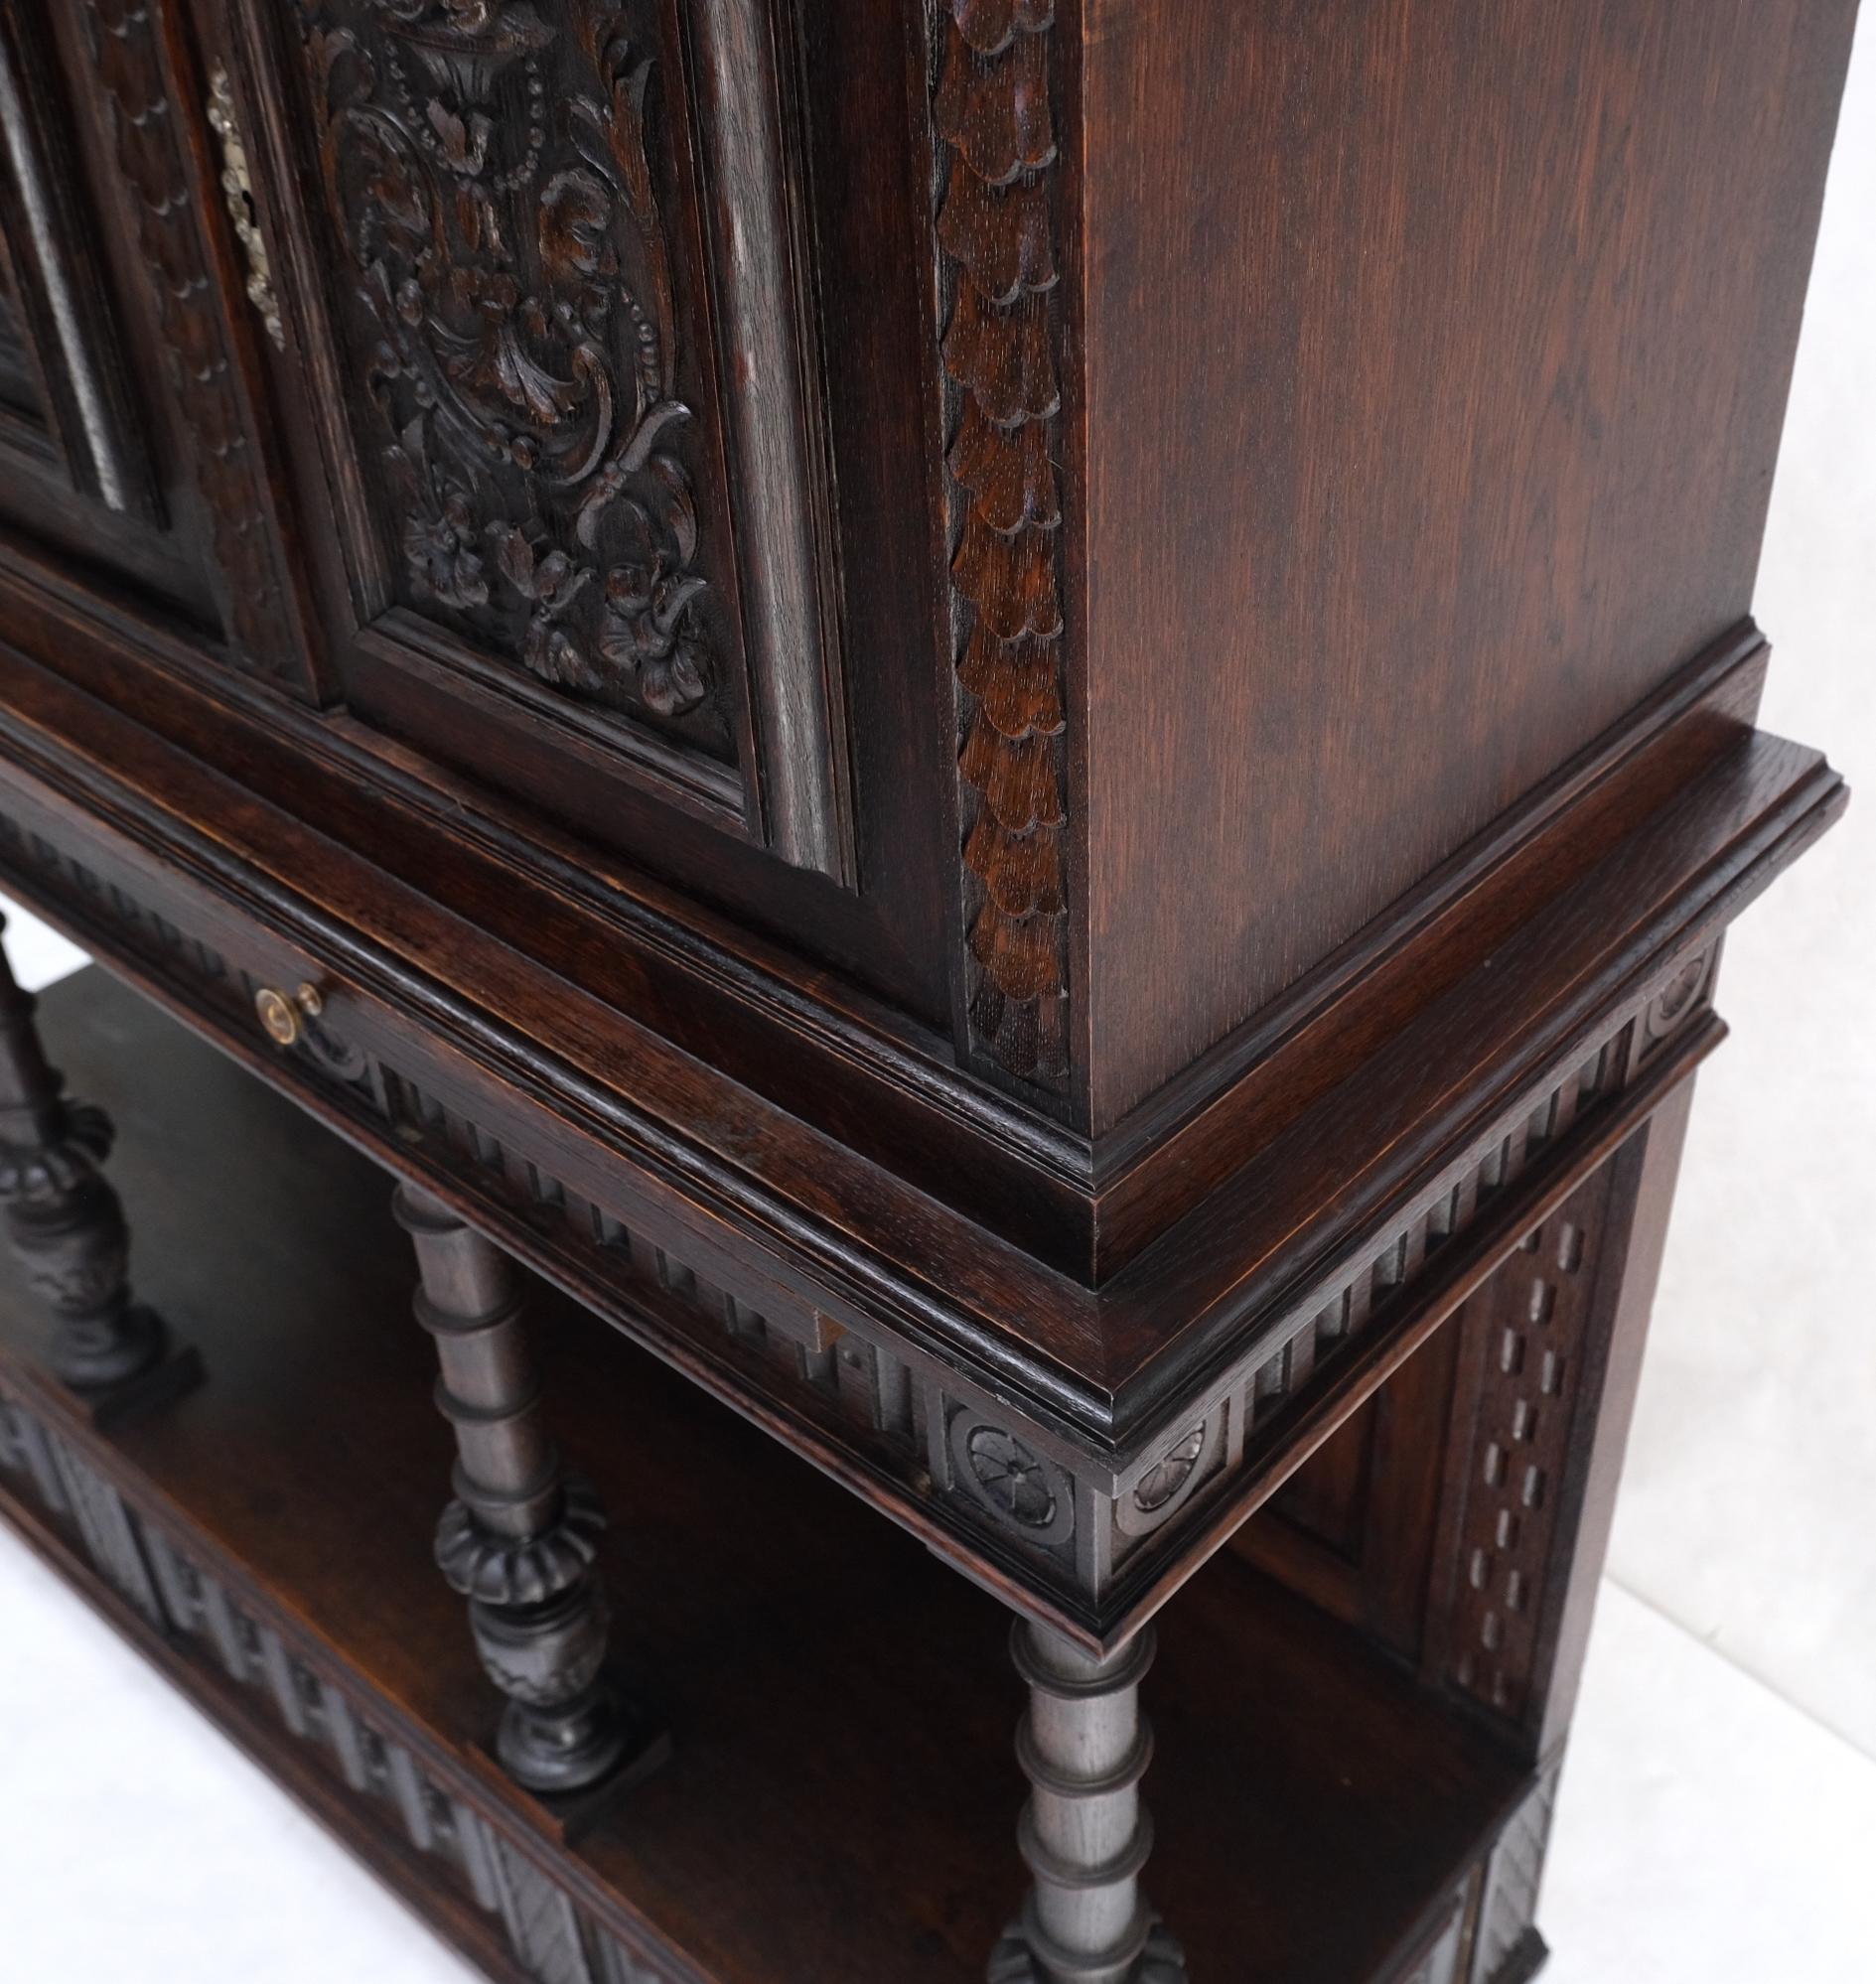 Carved Oak Jacobean style 3 doors drawers server credenza cabinet cupboard mint.
Beautiful turned solid oak supports.